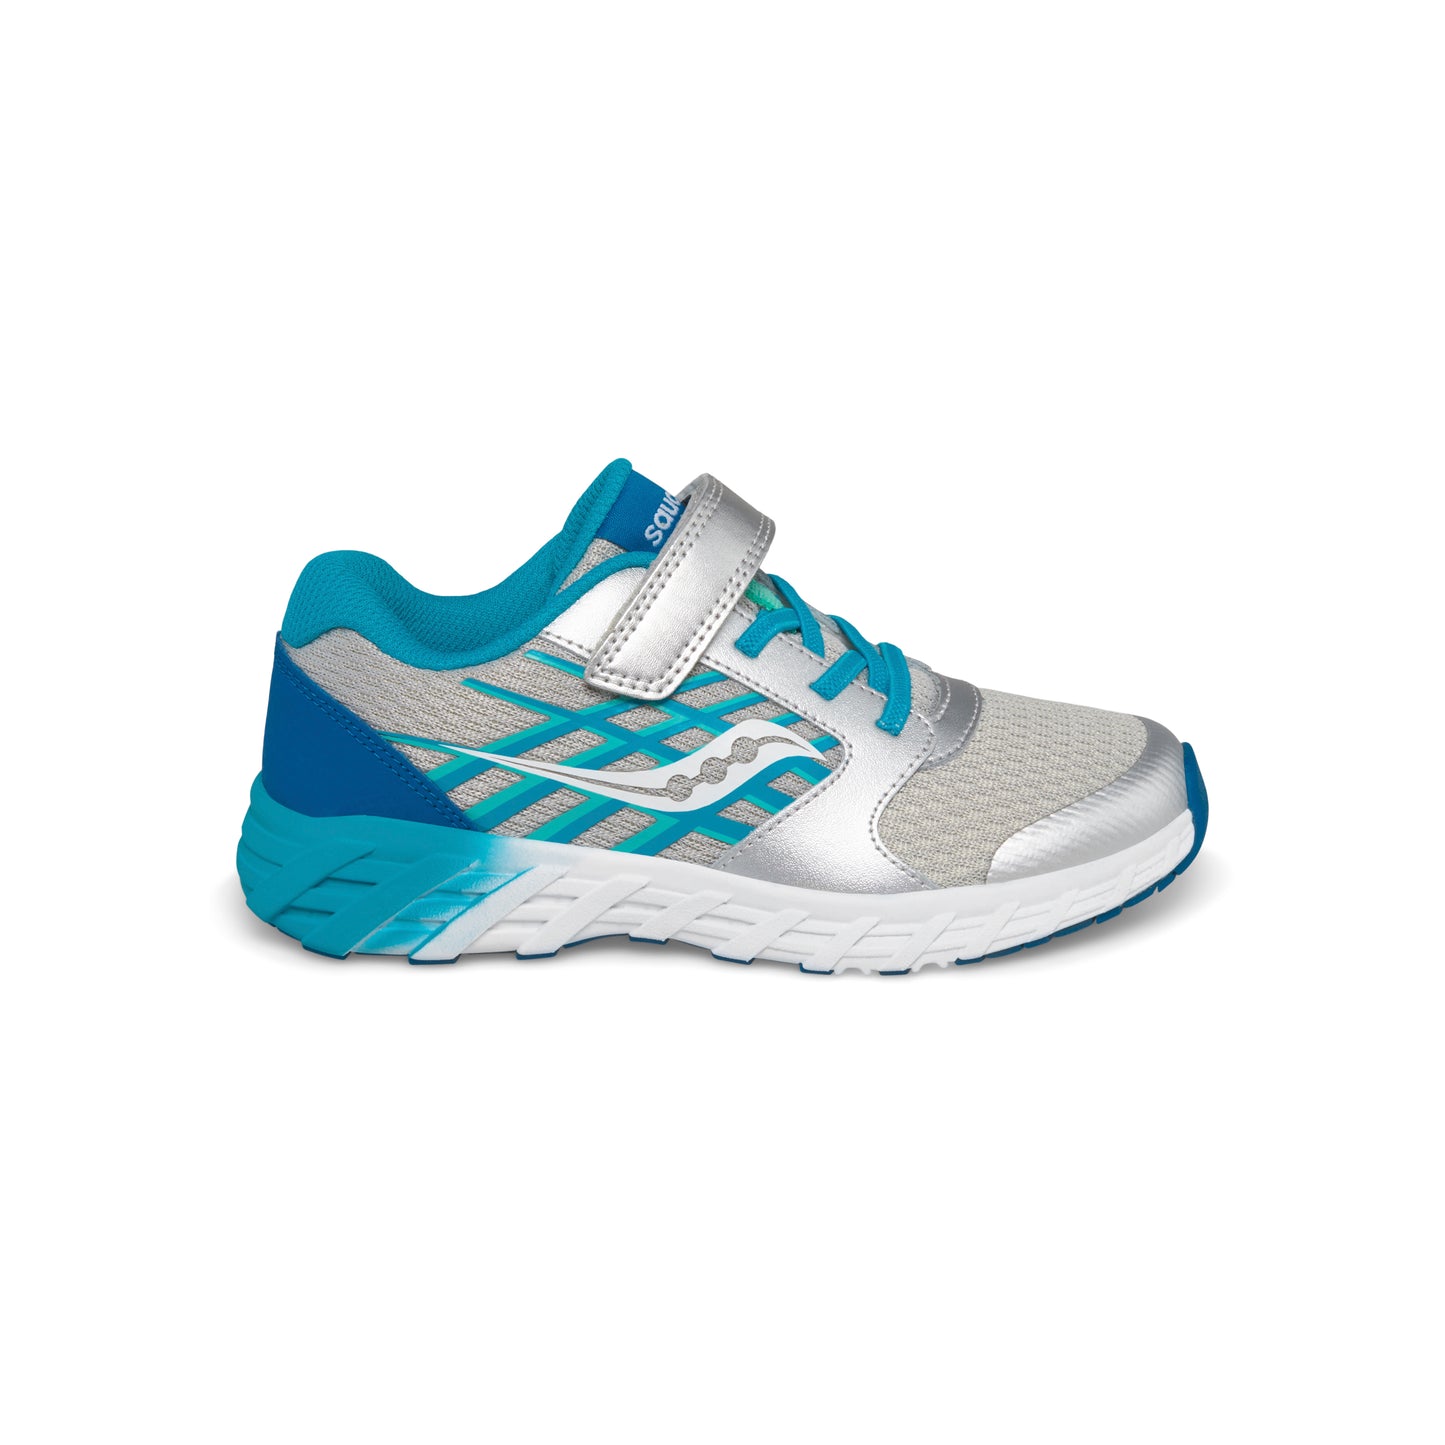 wind-ac-20-sneaker-bigkid-turquoise-silver__Turquoise/Silver_2